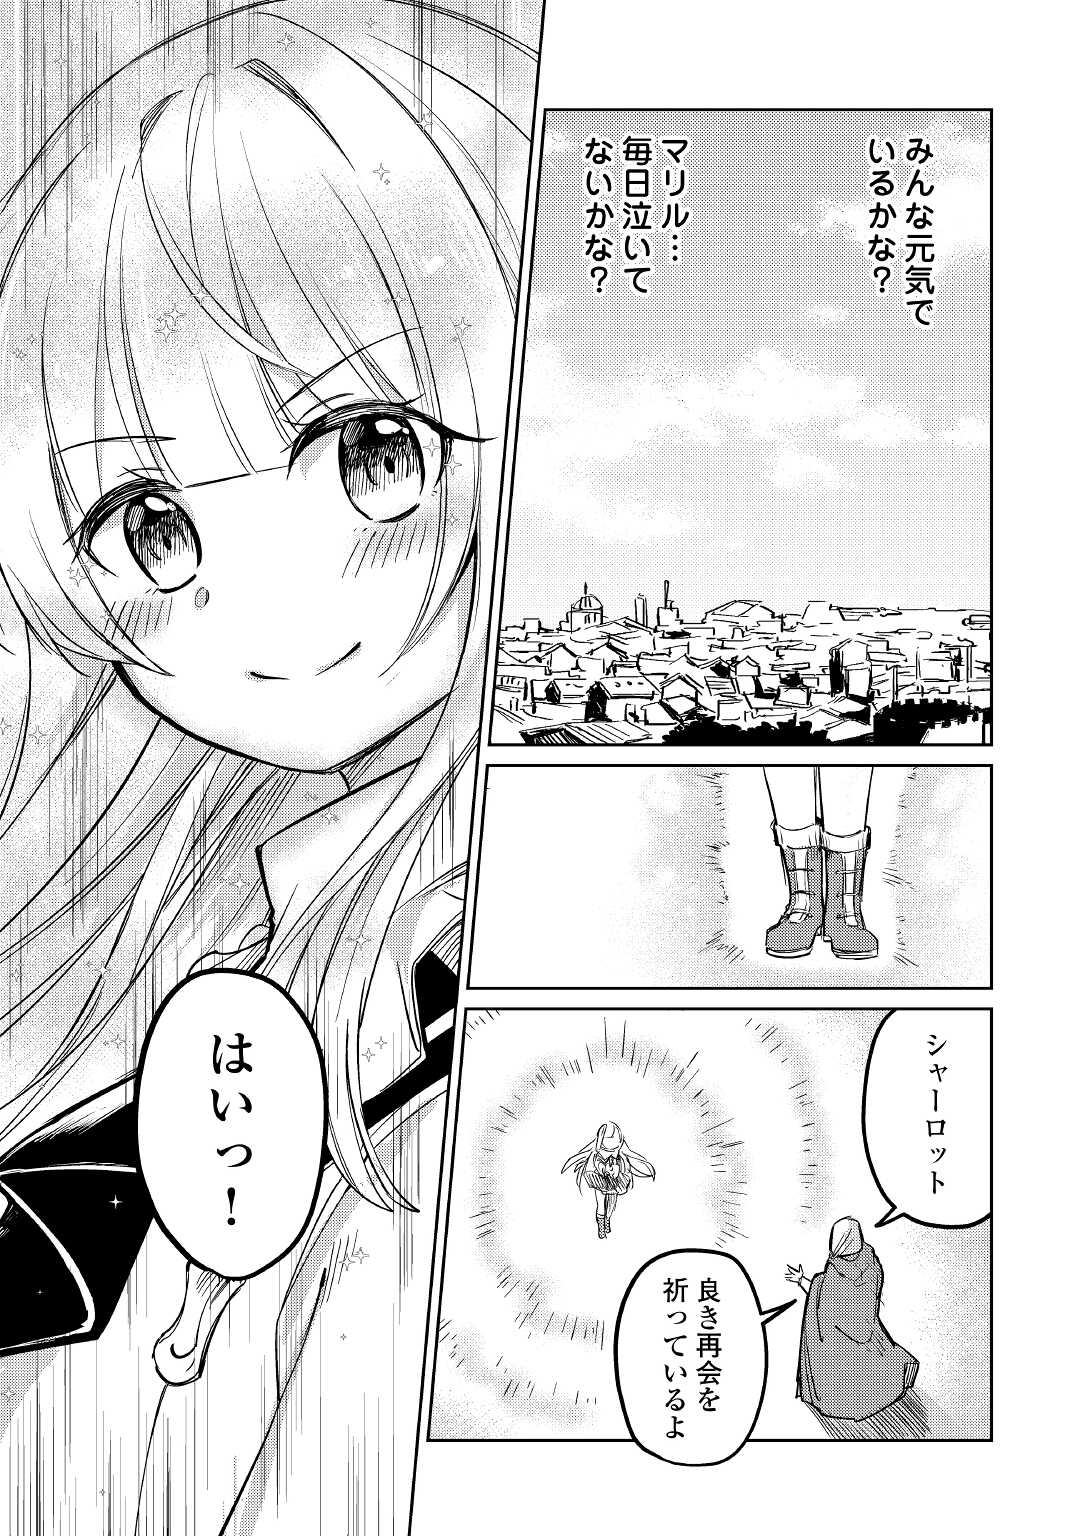 The Former Structural Researcher’s Story of Otherworldly Adventure 第41話 - Page 23